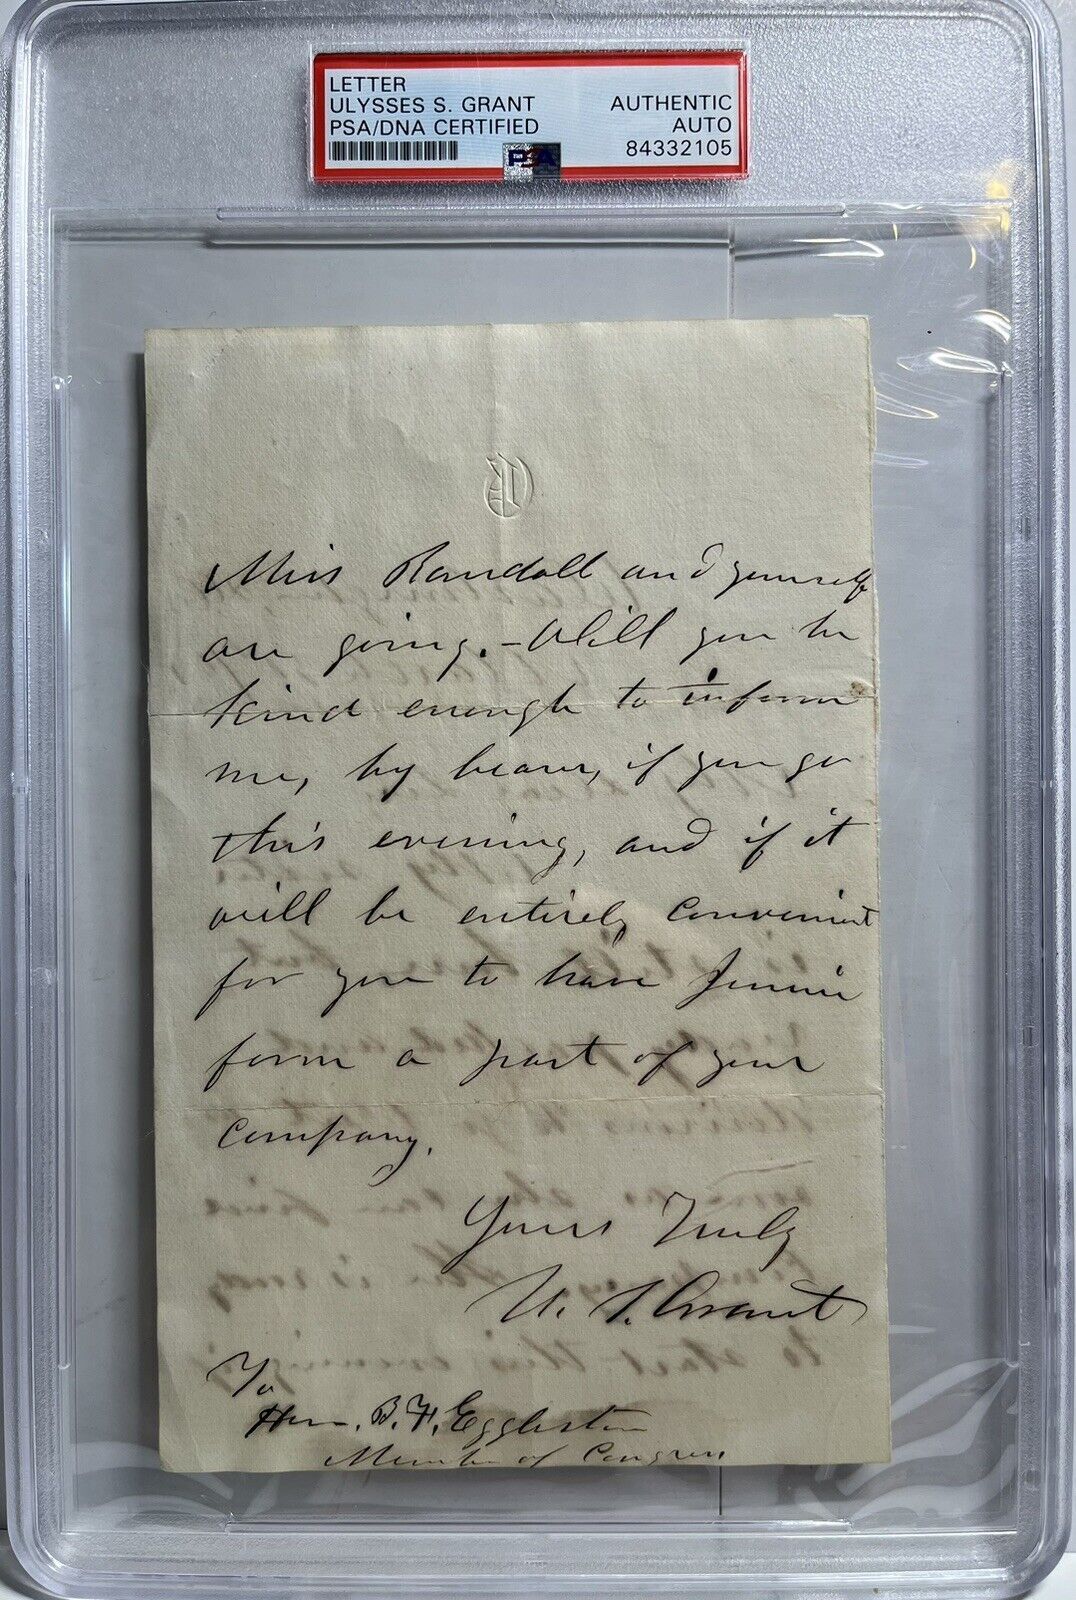 1867 PSA DNA Certified Ulysses S. Grant Written Signed Autographed Letter 10”x7